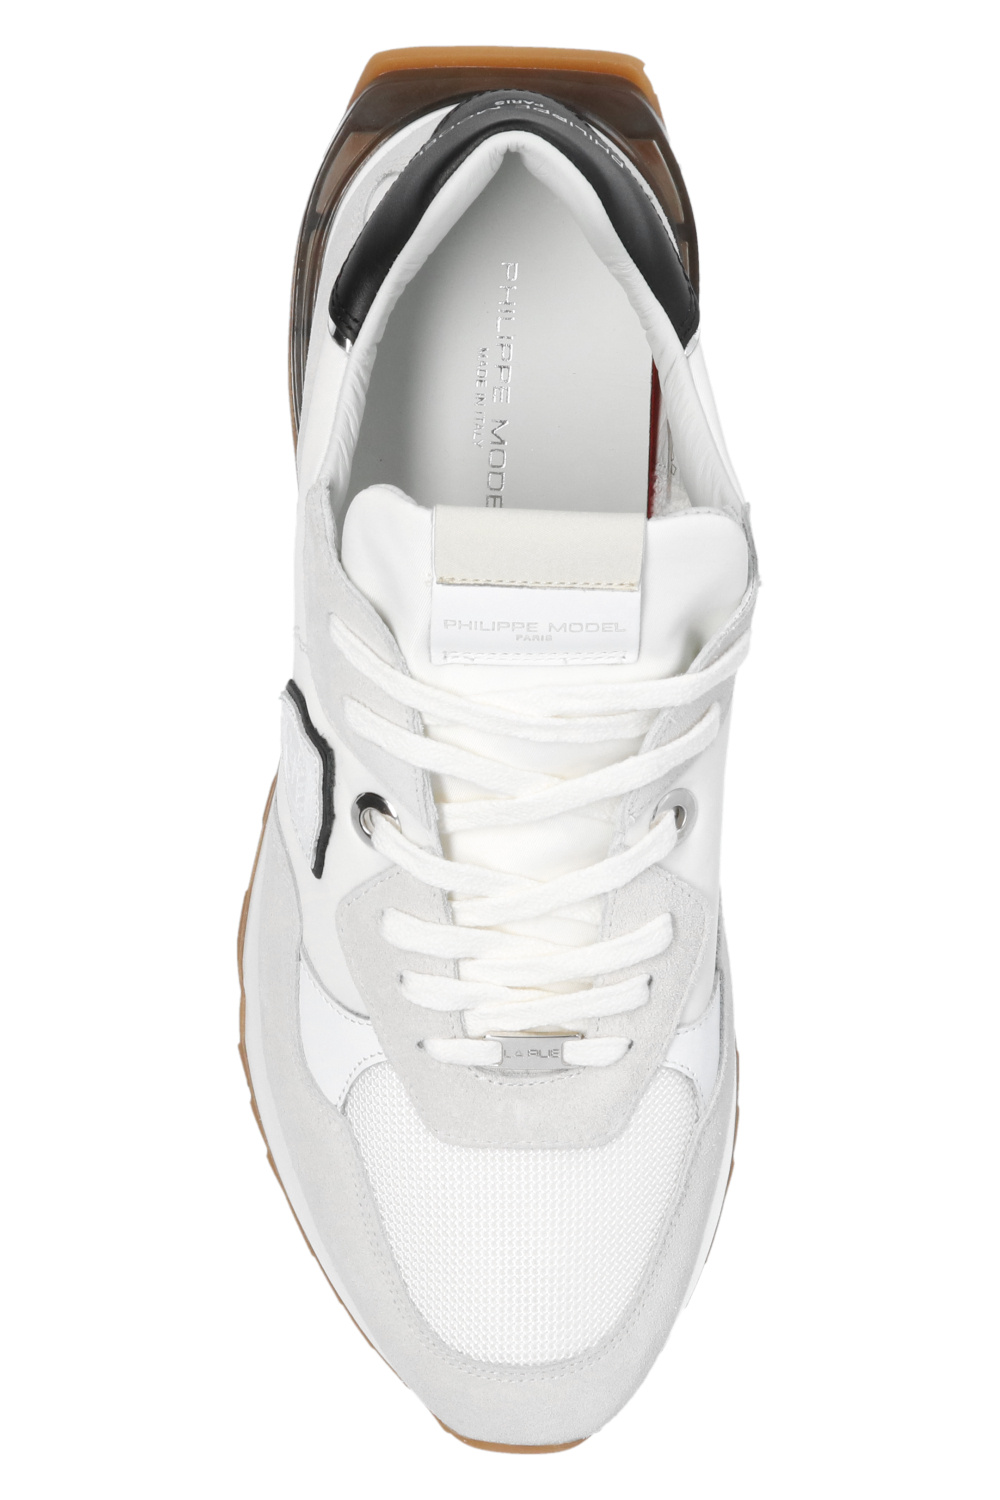 enz Pijler Fantasie White 'Nike Air Max 2090 AAA Men Shoes BBW Philippe Model - running across  the country well sort - IetpShops Canada